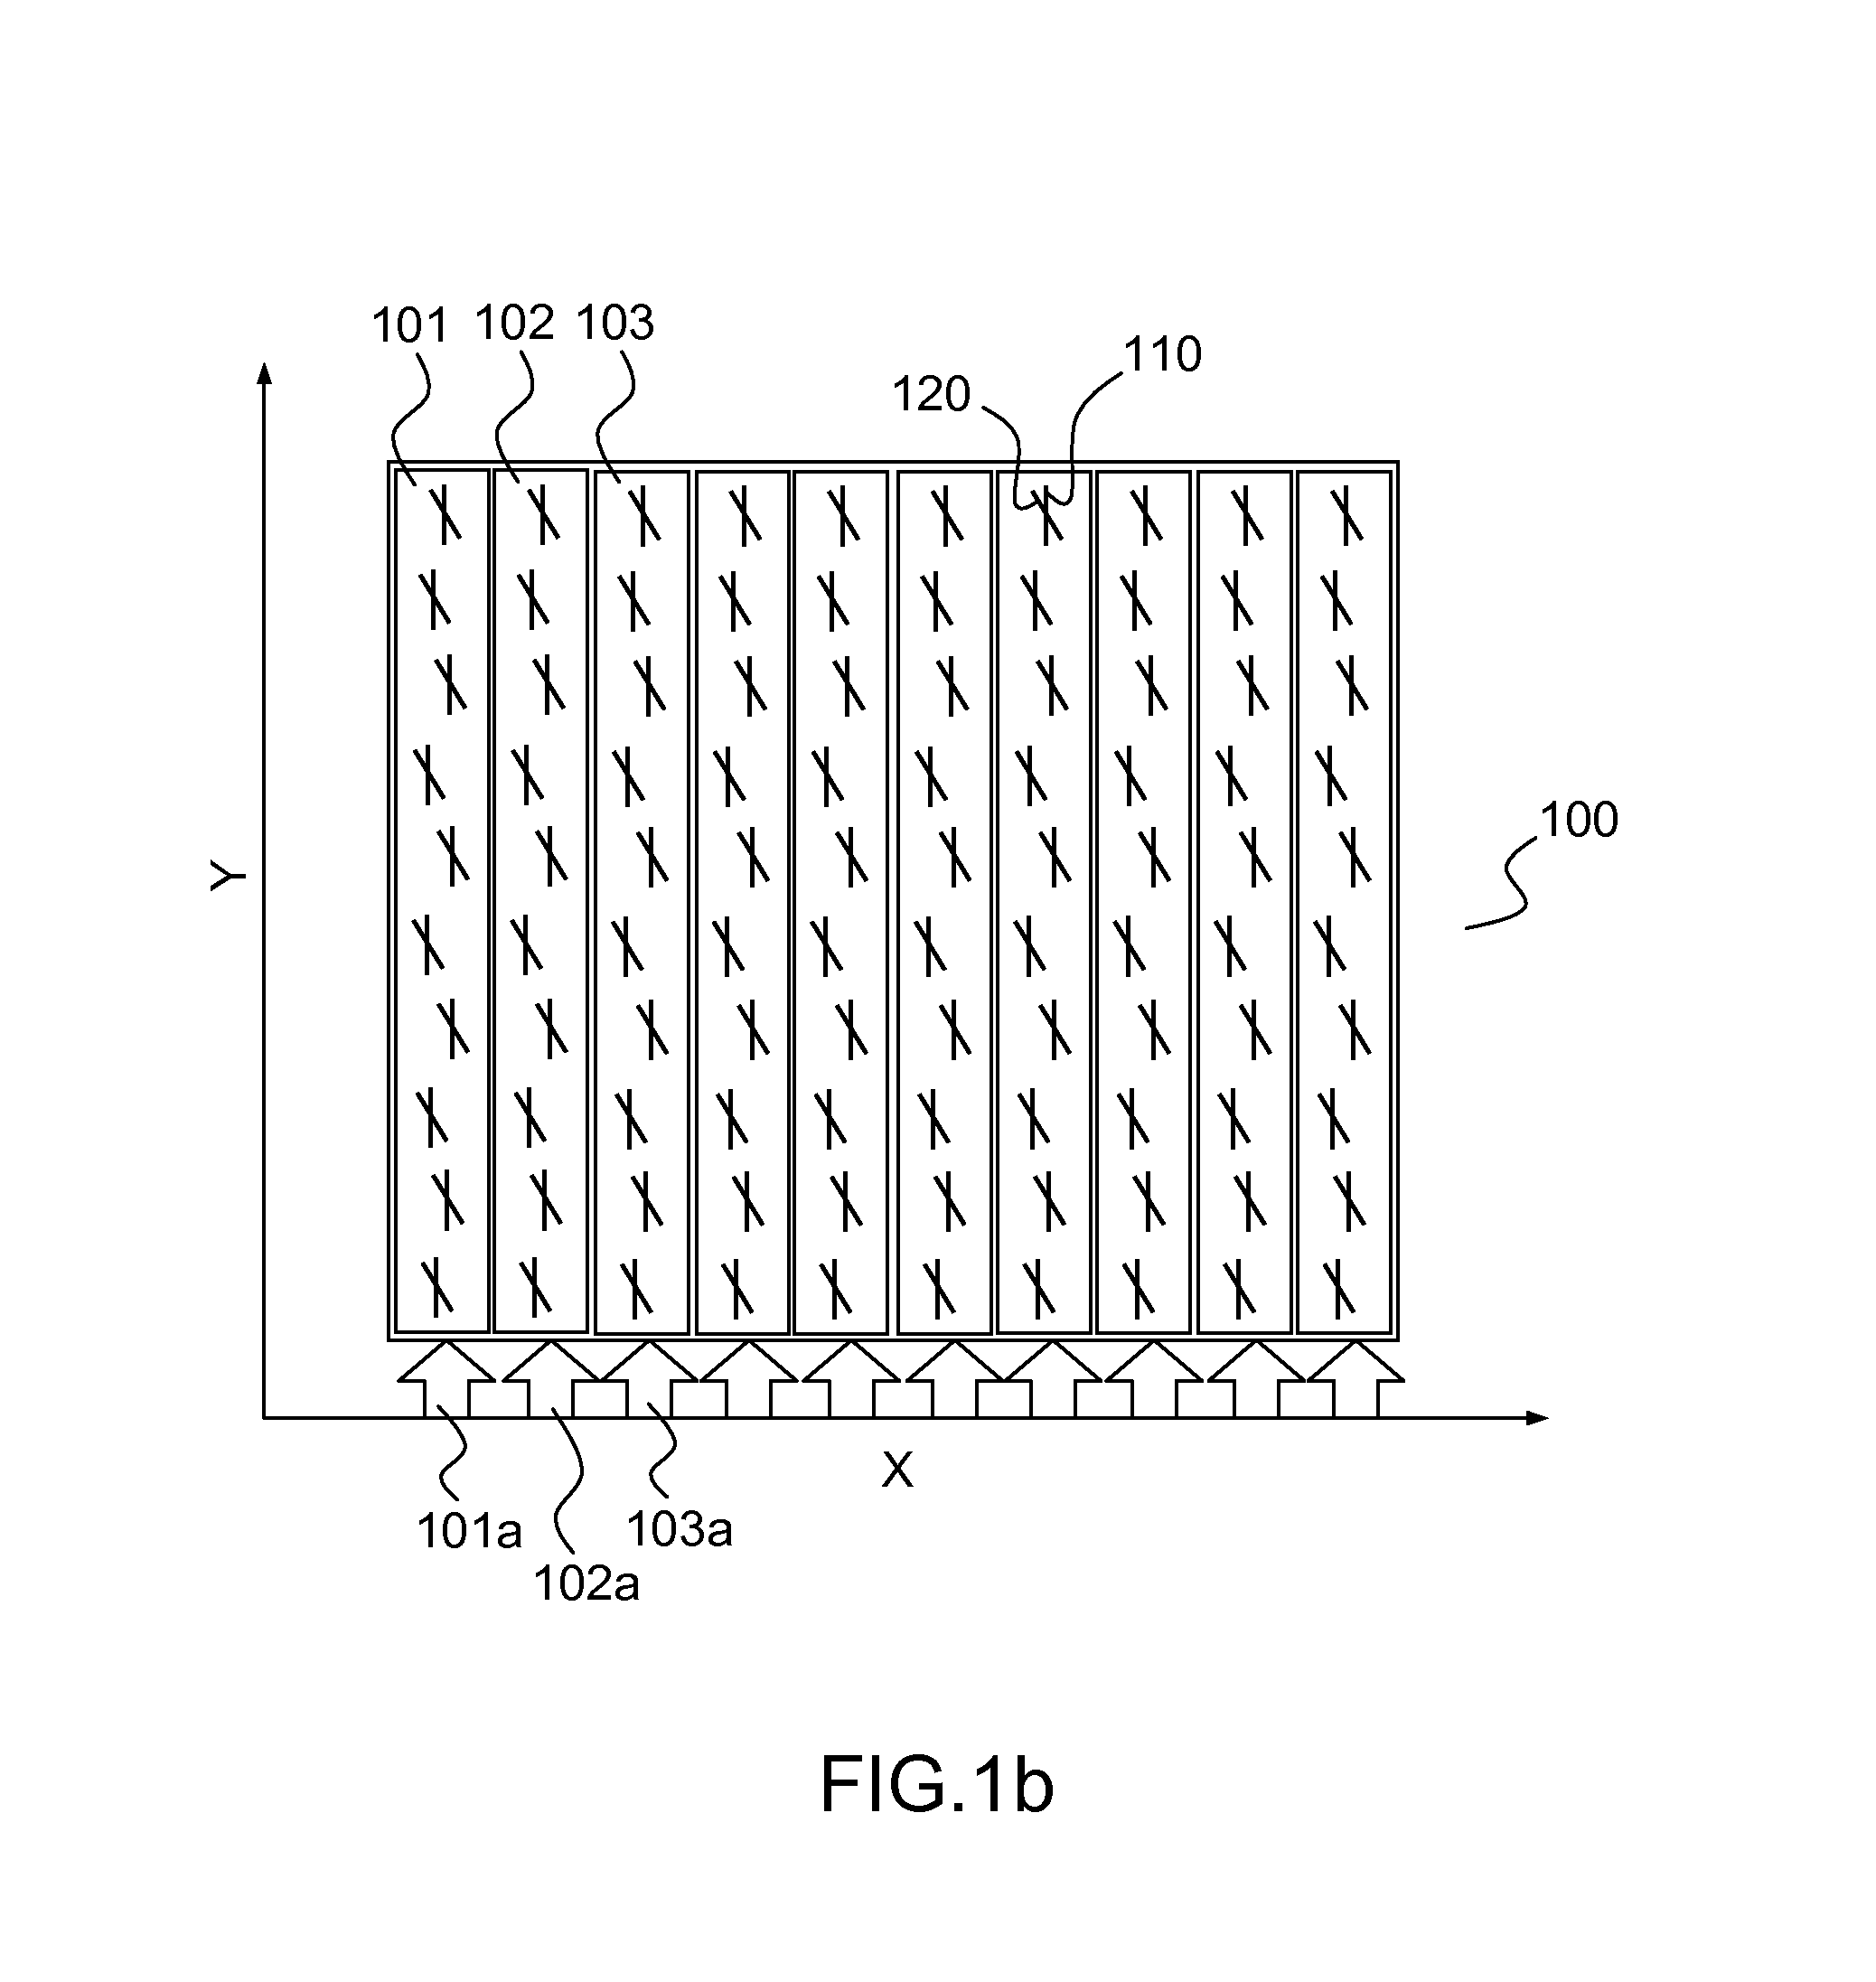 Directional Mobile Antenna with Polarization Switching by Displacement of Radiating Panels